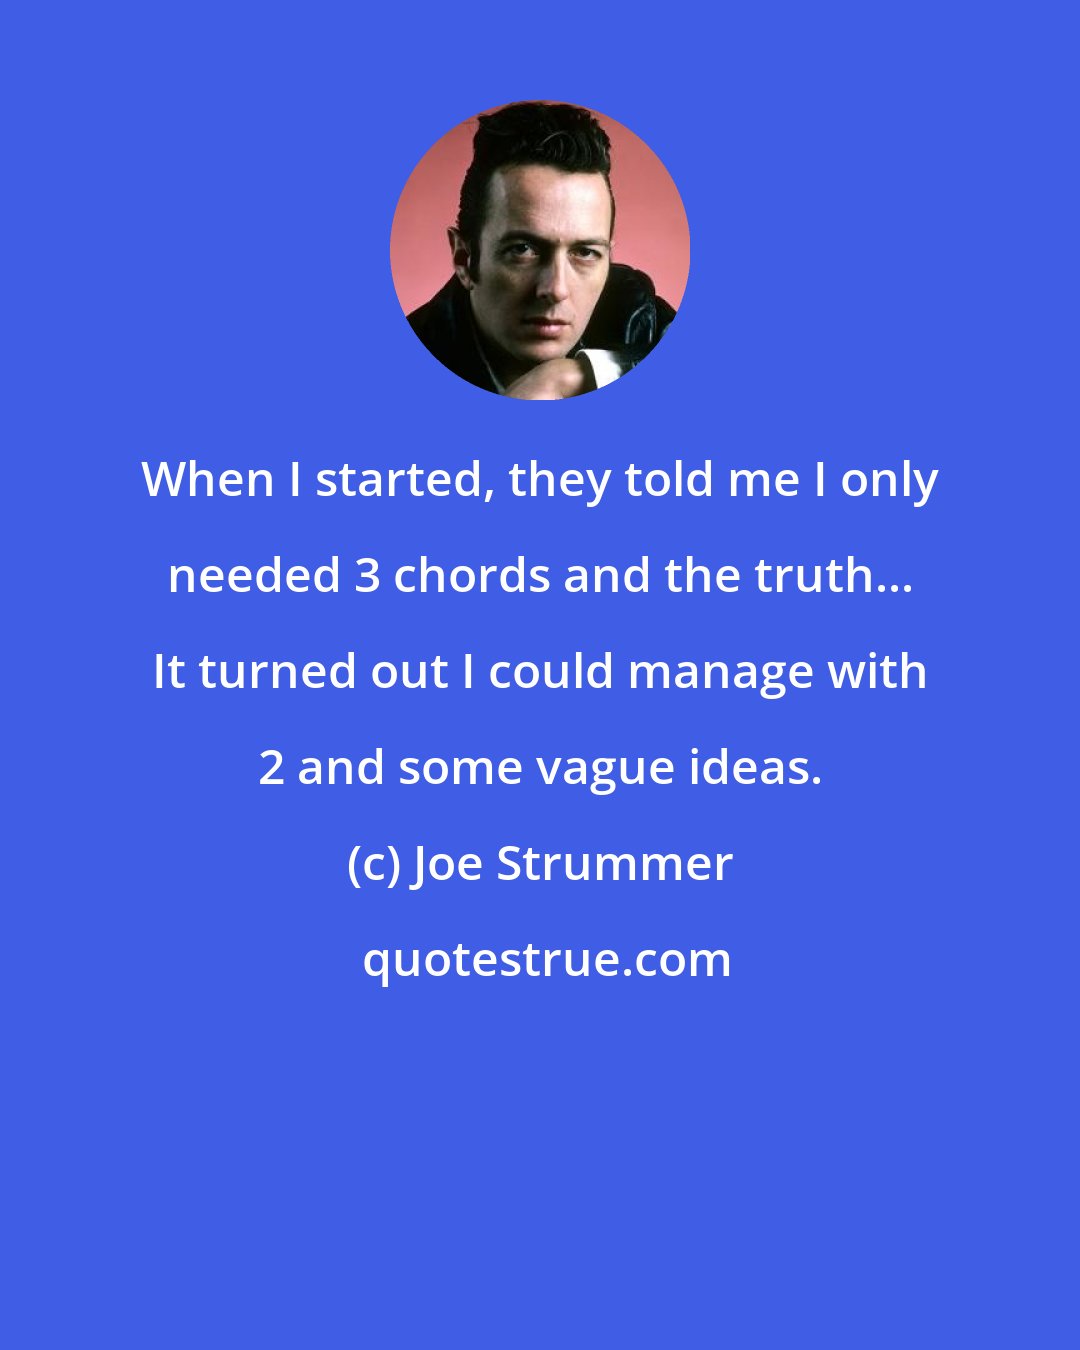 Joe Strummer: When I started, they told me I only needed 3 chords and the truth... It turned out I could manage with 2 and some vague ideas.